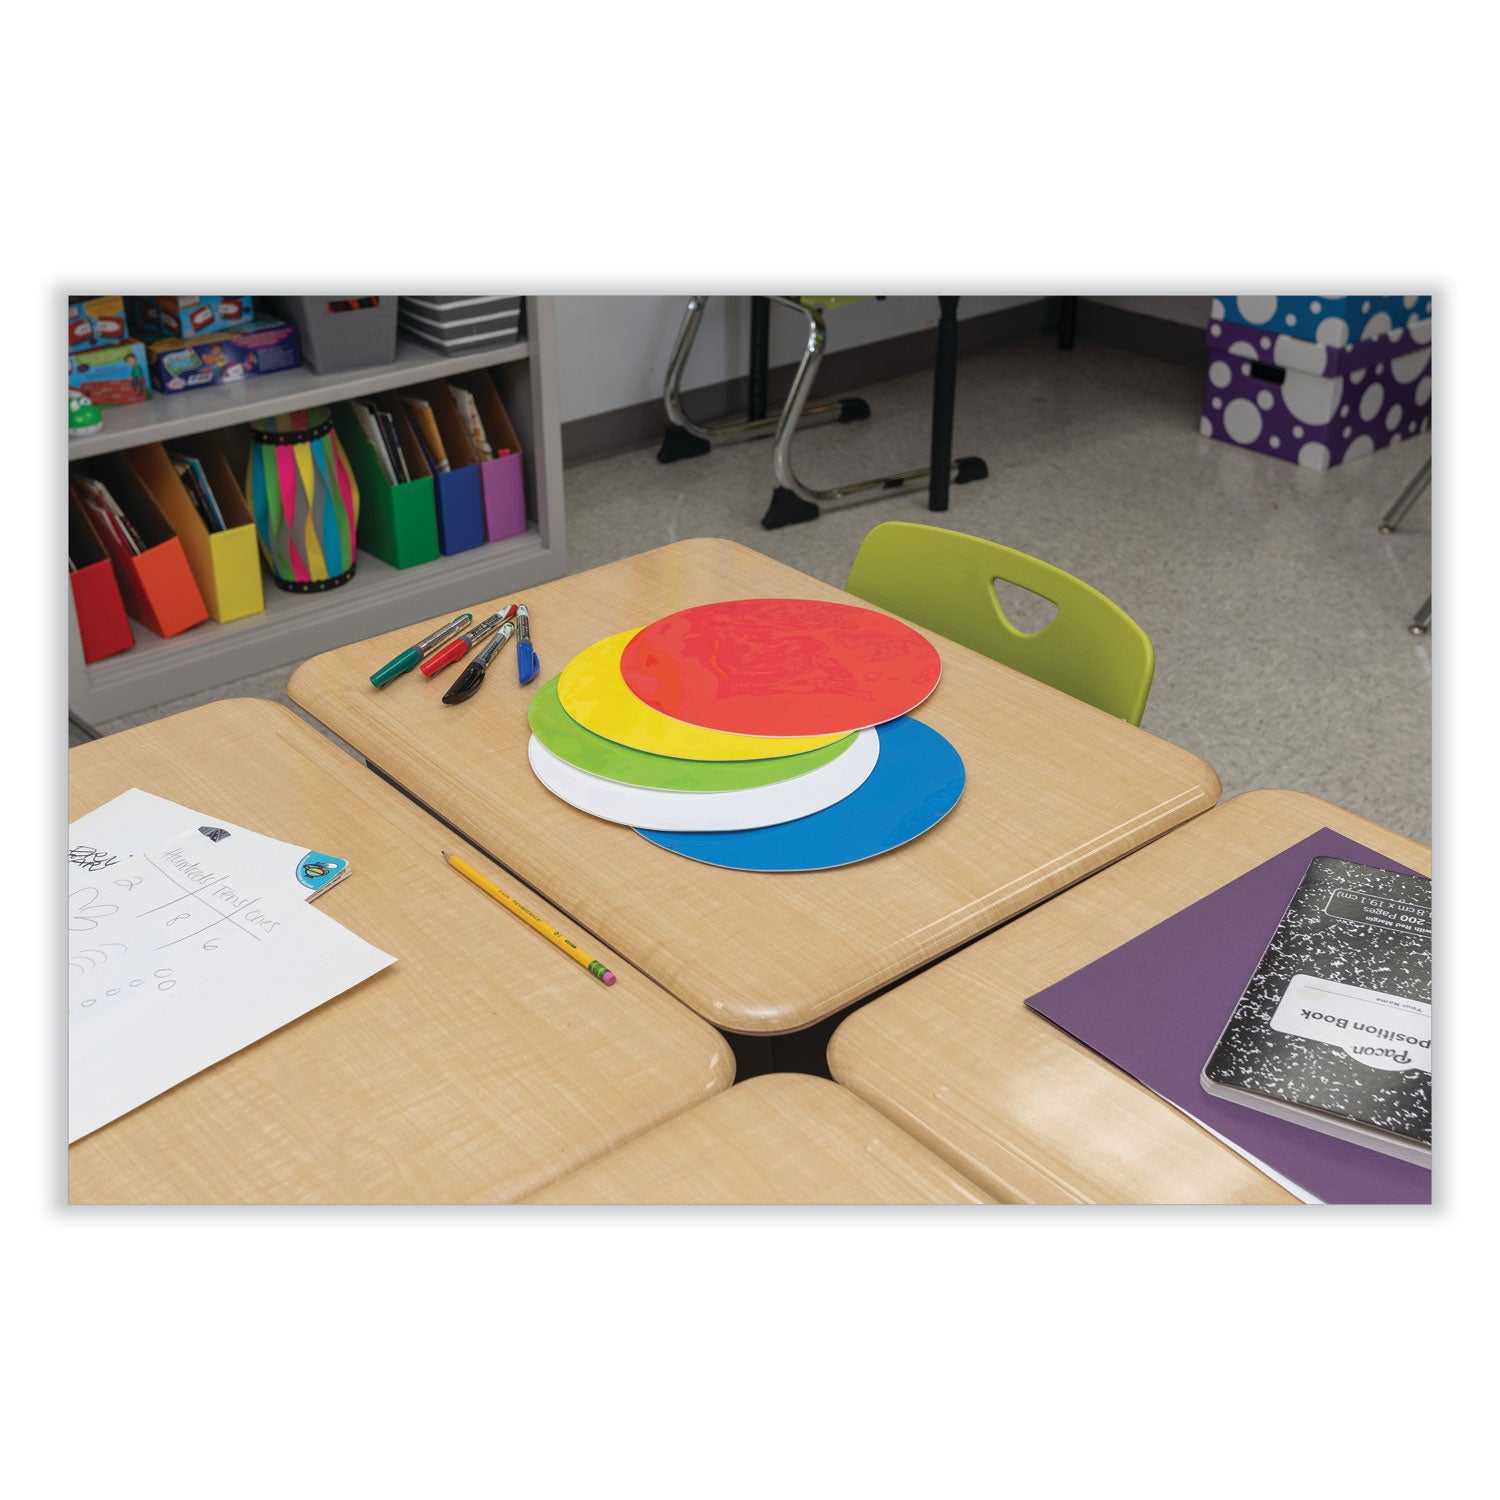 self-stick-dry-erase-circles-10-x-10-blue-green-red-white-yellow-surfaces-10-pack_pac9012 - 3